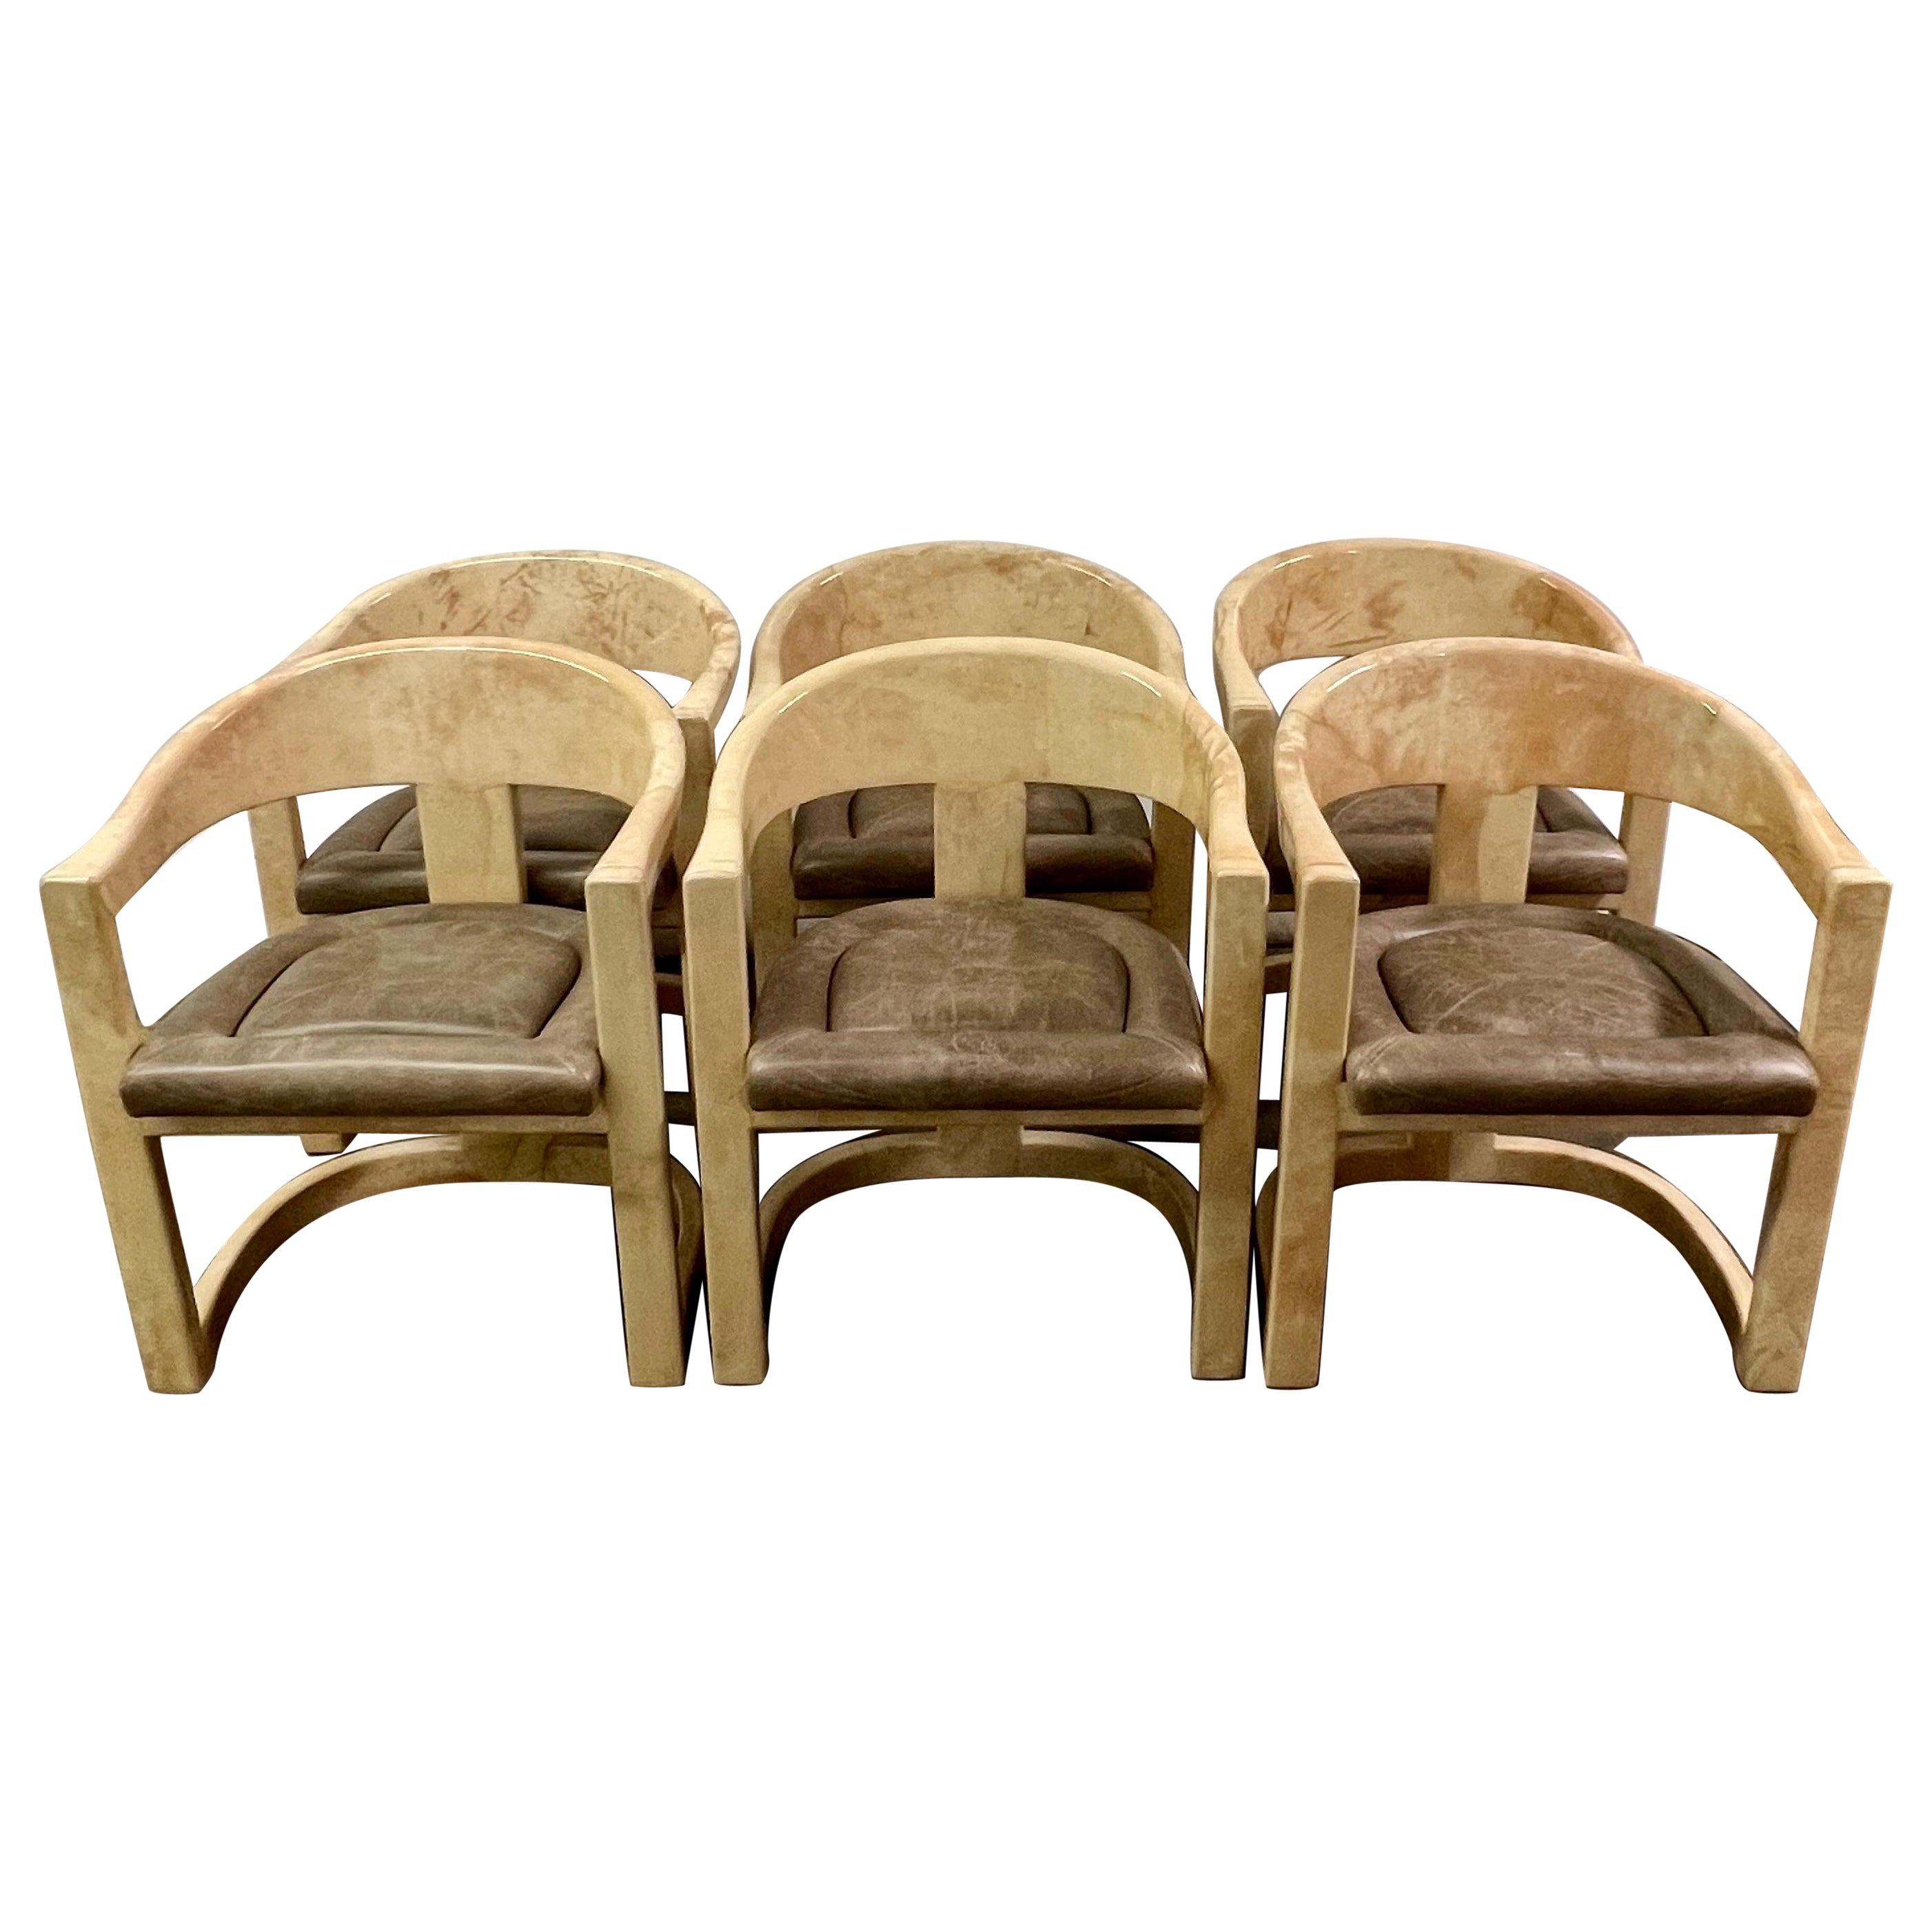 6 Karl Springer Onassis Chairs in Goatskin with Leather Seats